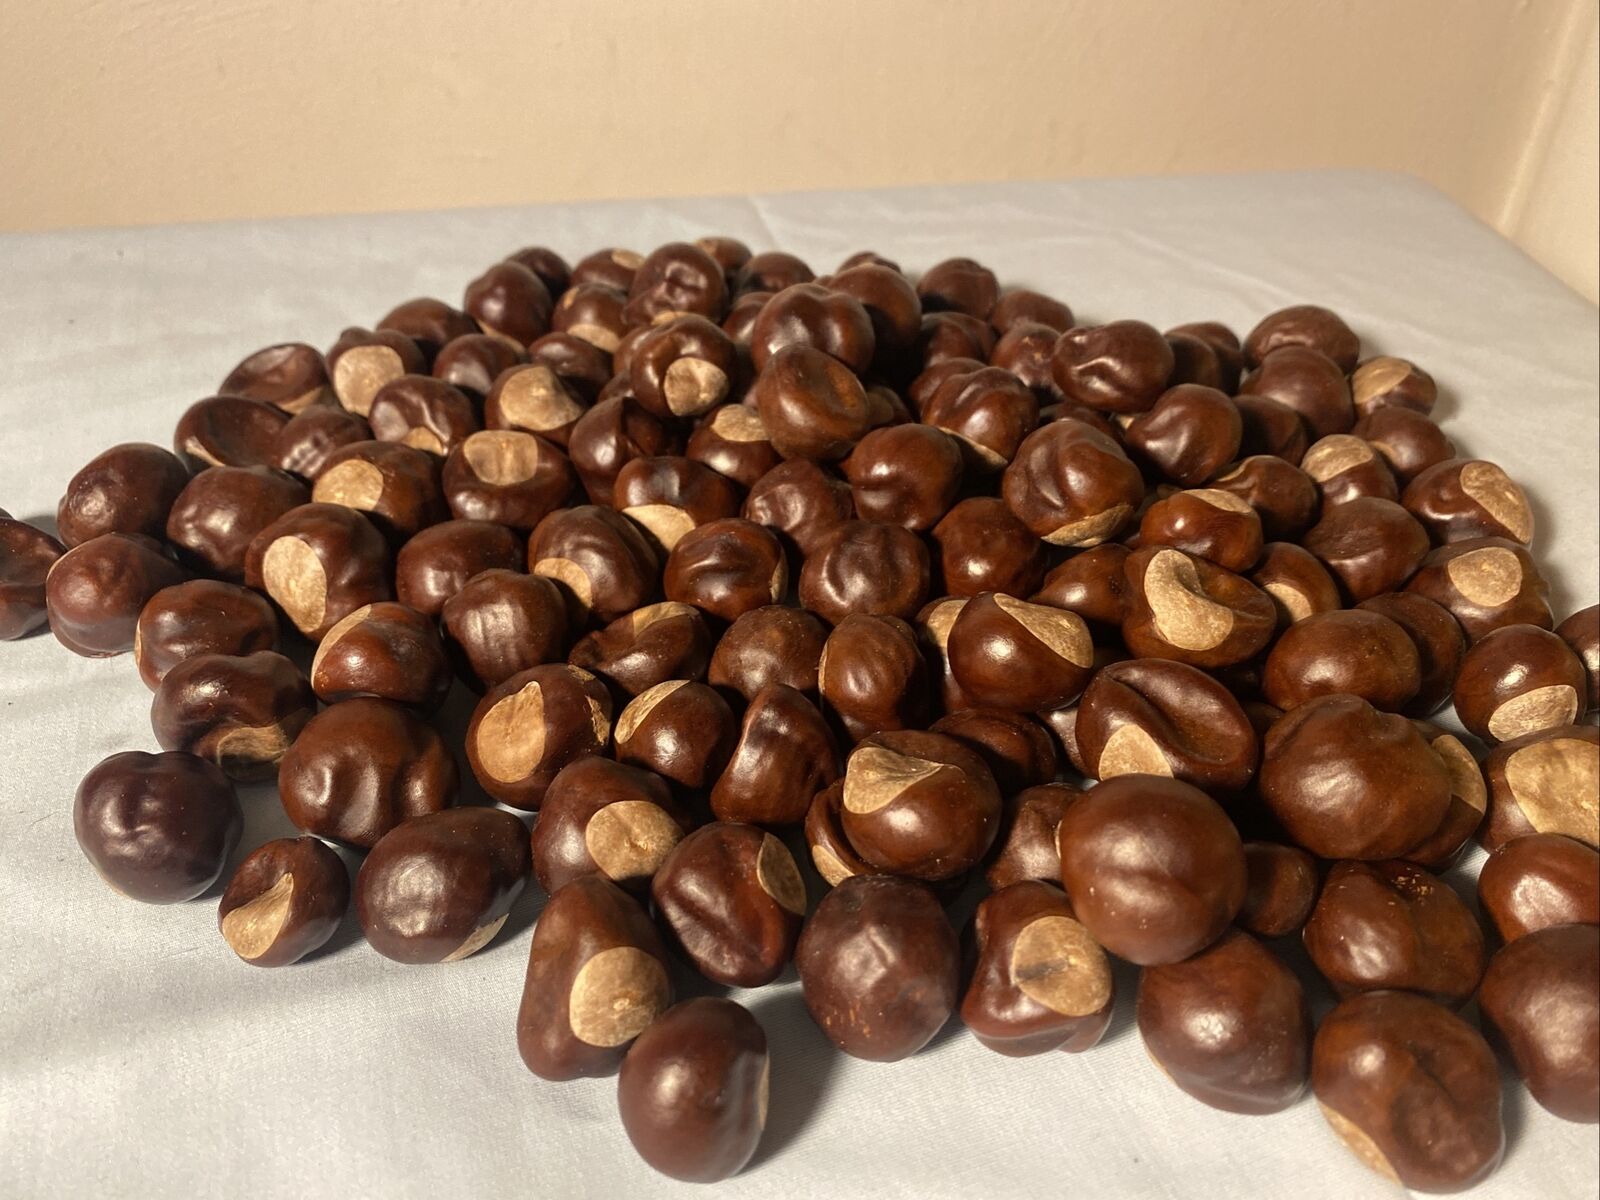 Lot Of 25 Buckeyes Buckeye Nuts Naturally Dried 2021 Mixed Sizes Jewelry Crafts